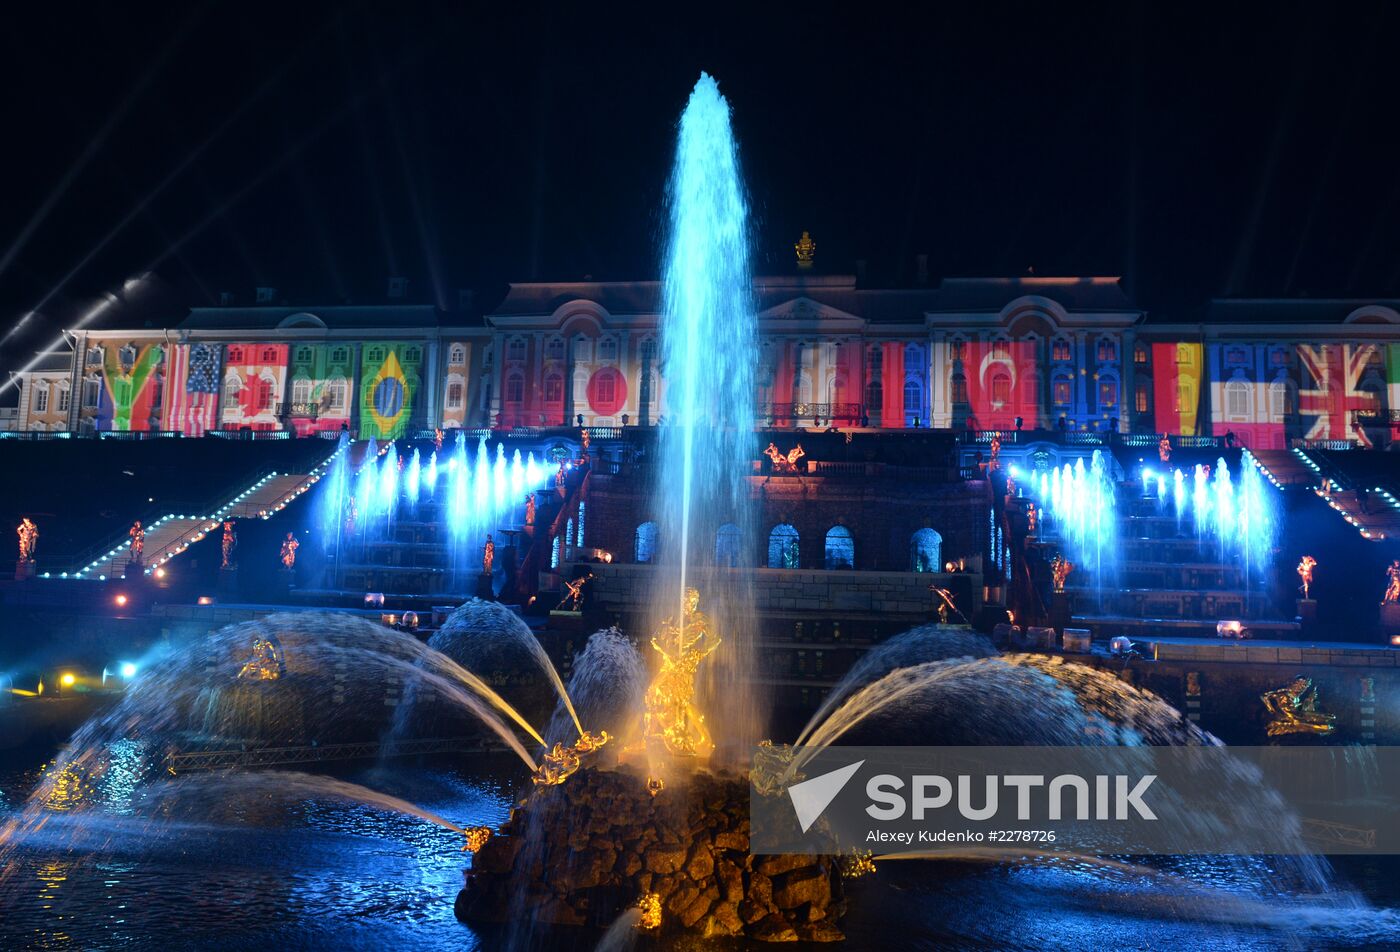 Musical fountain show for G20 Summit participants